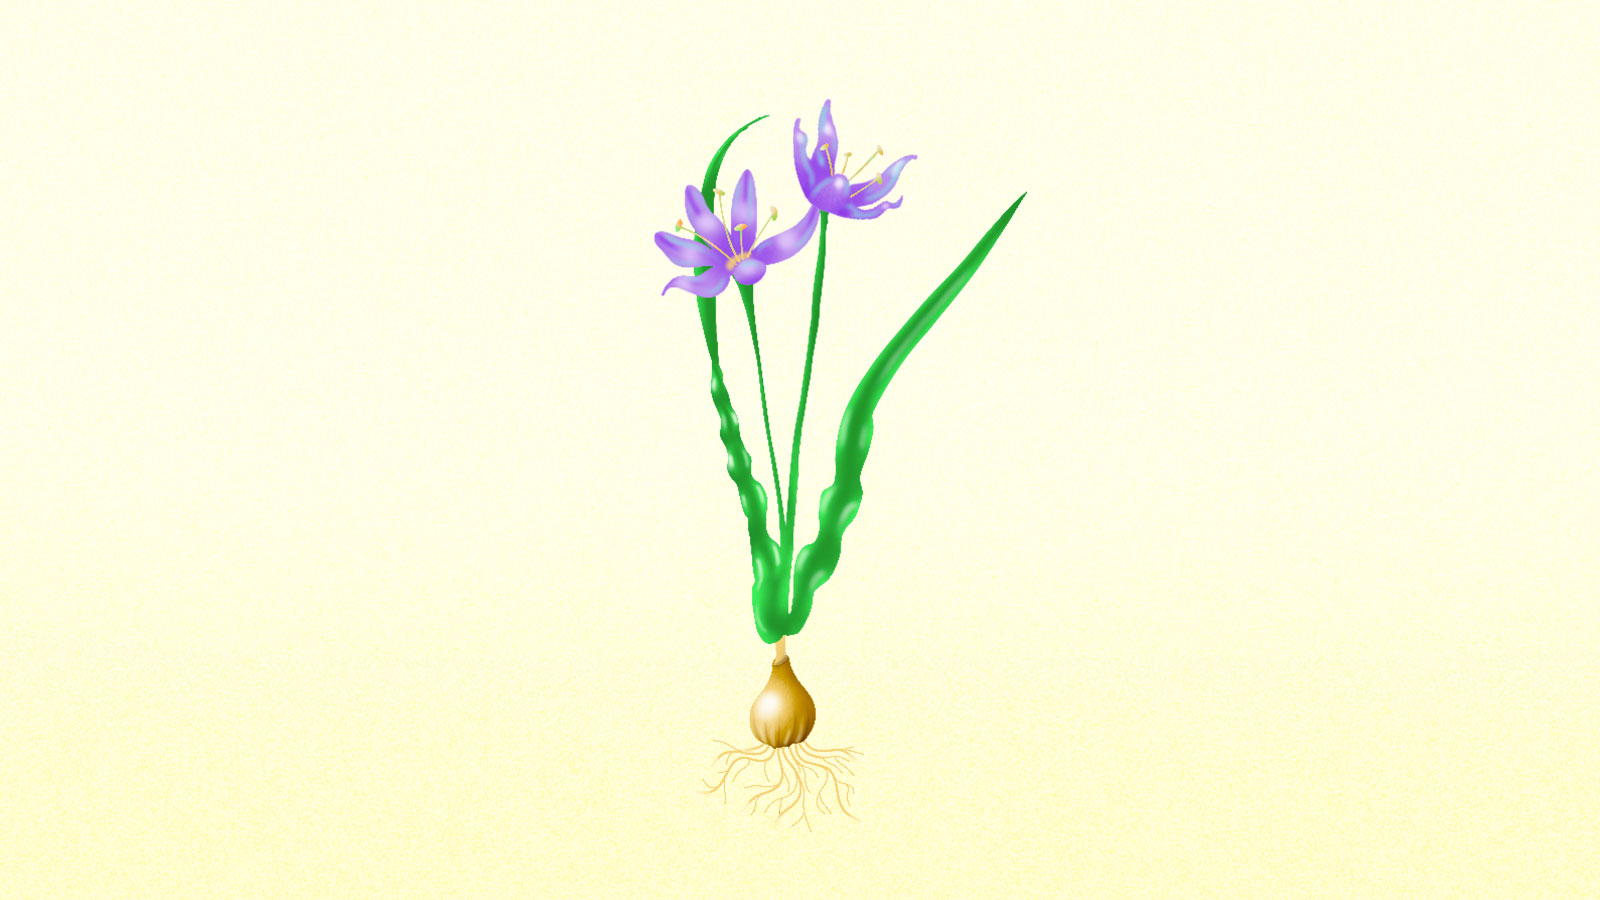 Illustration of camas plant with purple flowers and brown bulb on cream background